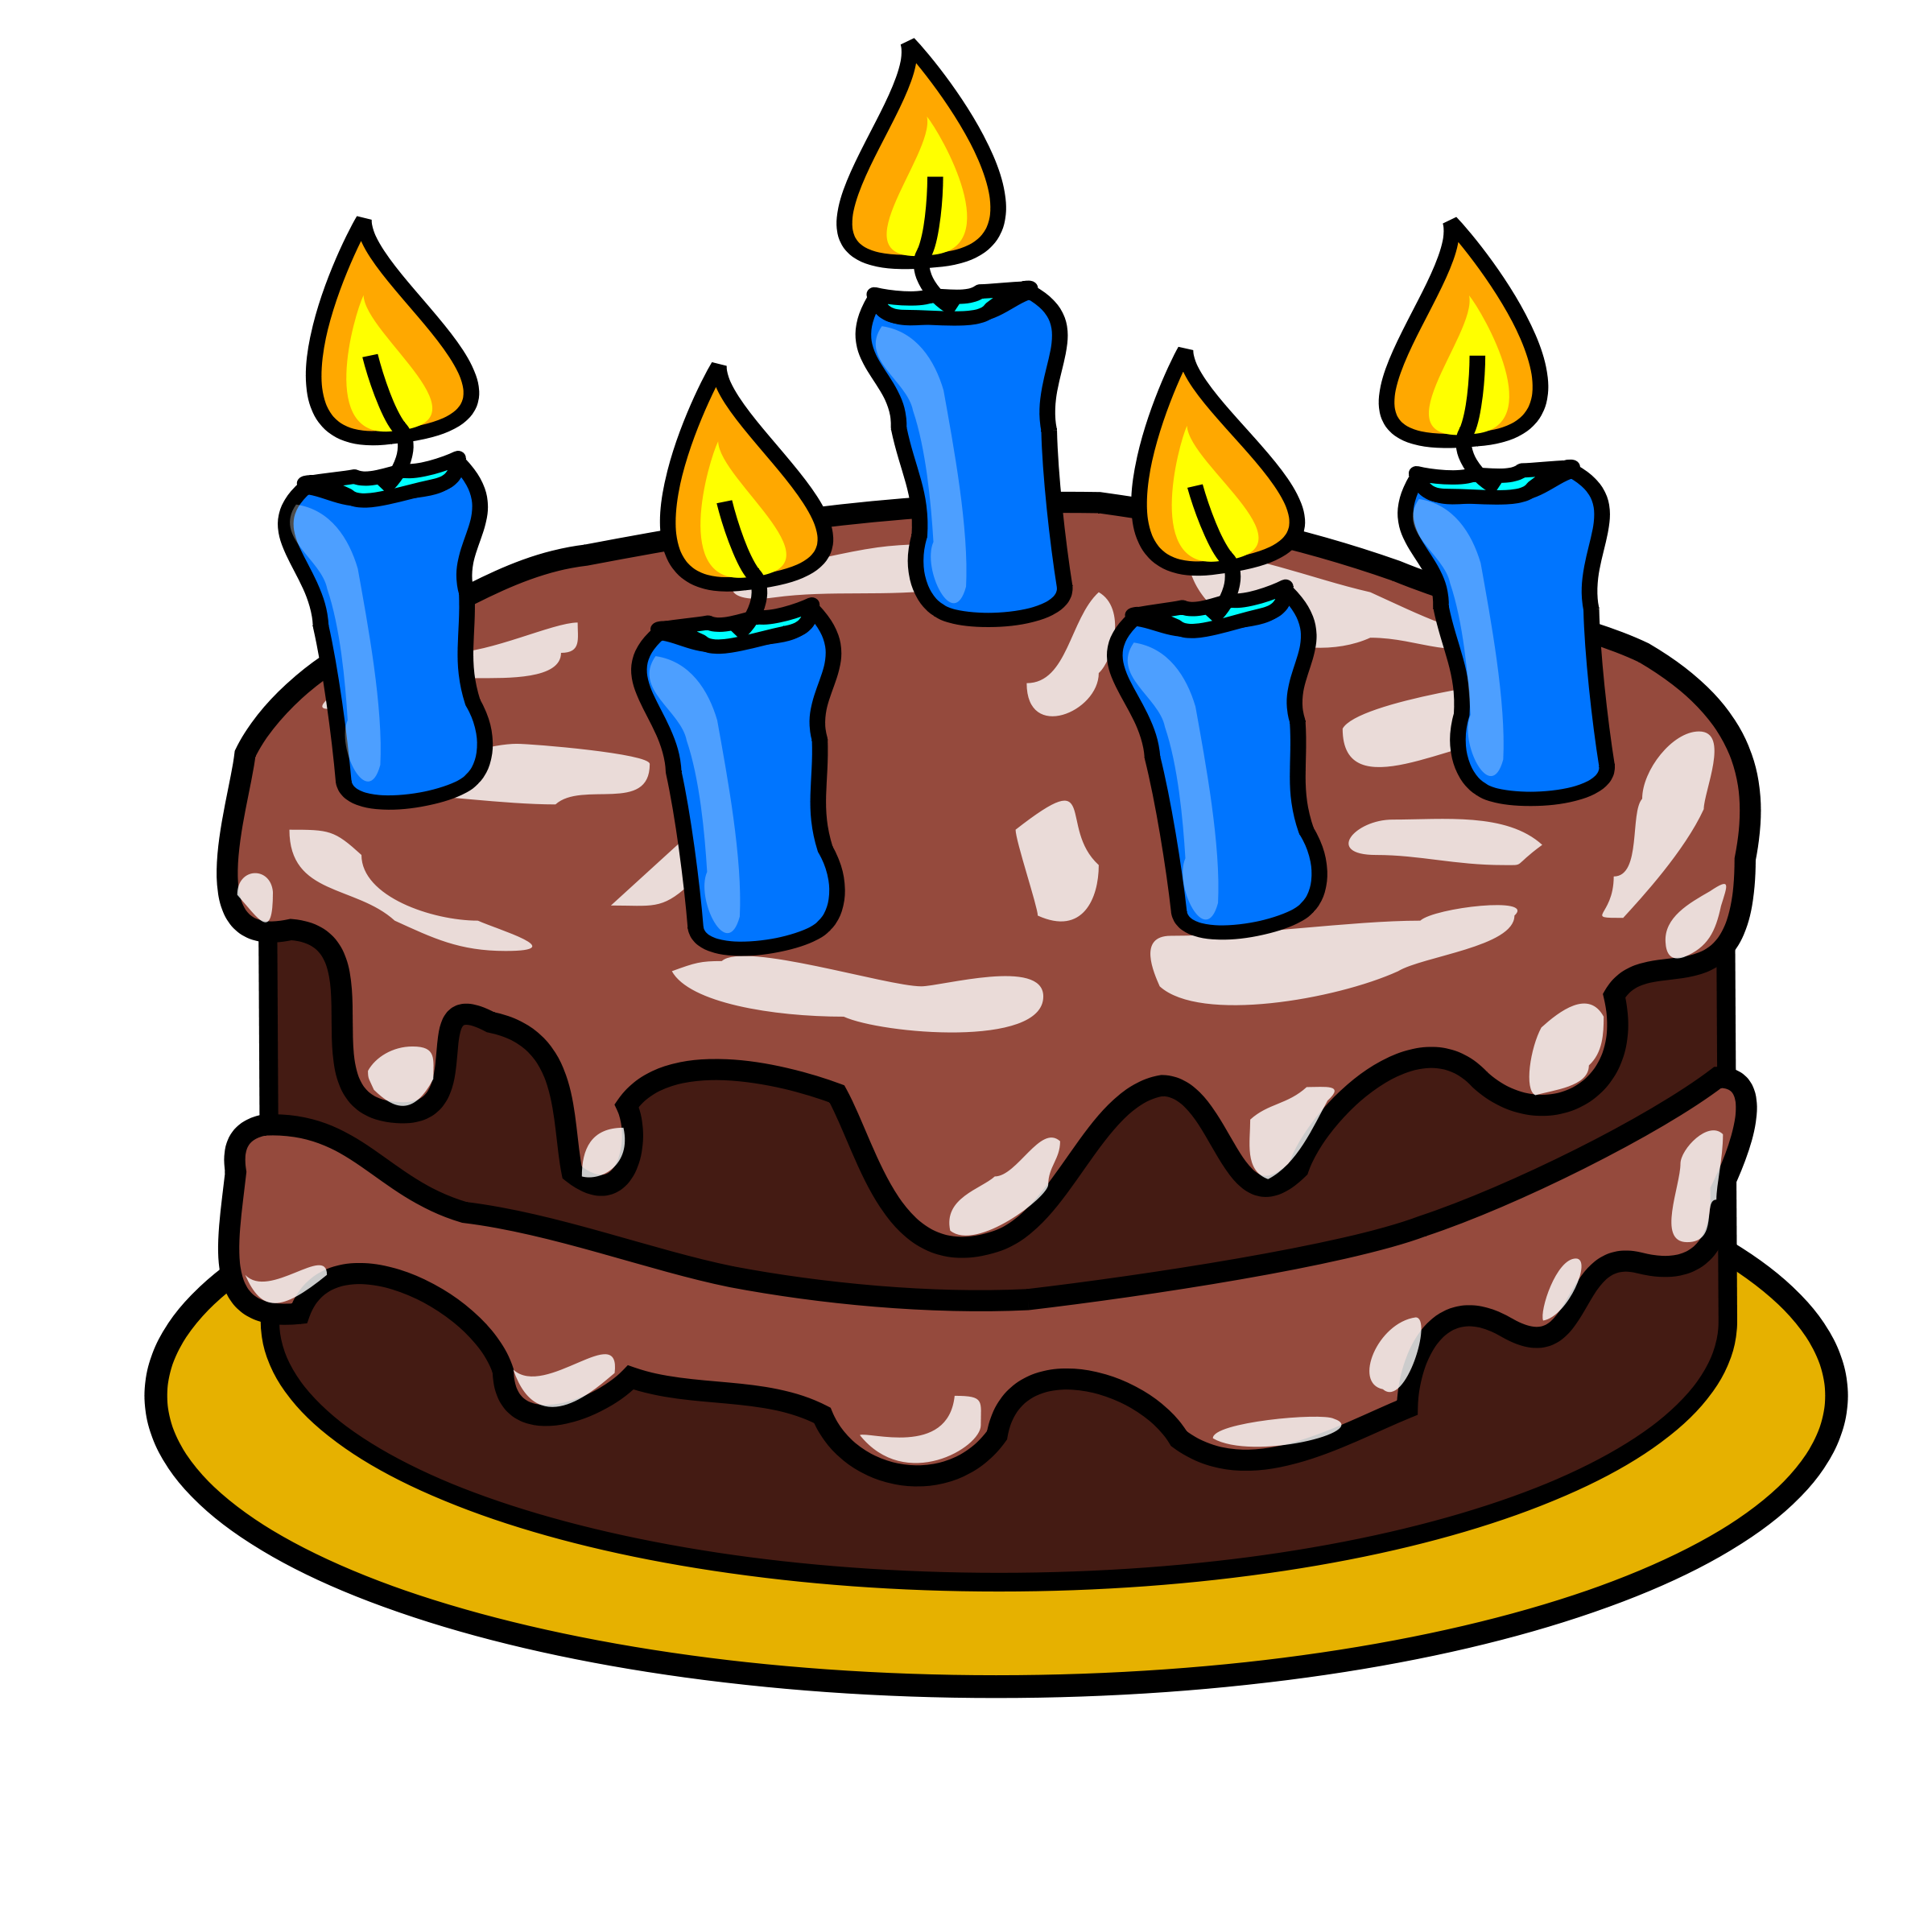 Free clipart cake images - Cl